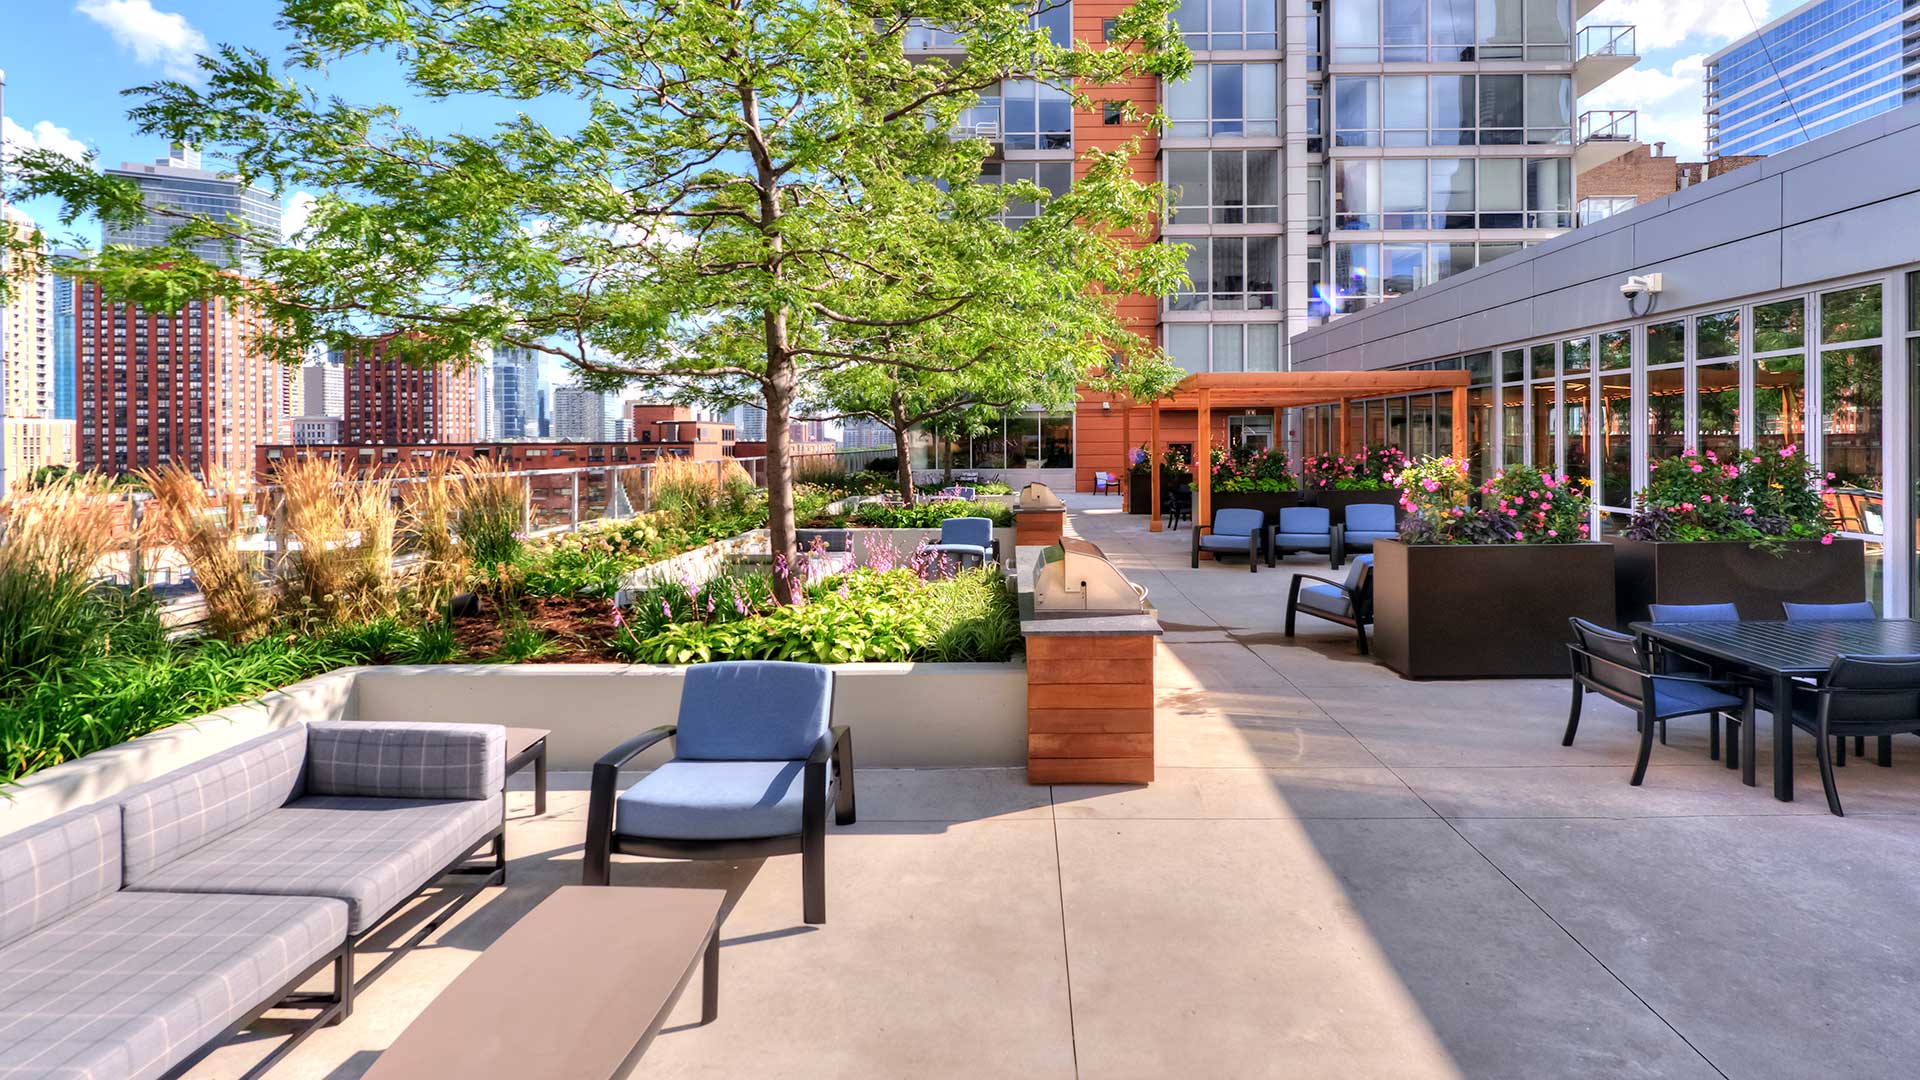 Looking down the outdoor terrace at Burnham Pointe. Along the left are various outdoor furniture pieces and potted plants, the city seen in the distance. Along the right is more seating and windows that look into the entertainment lounge.